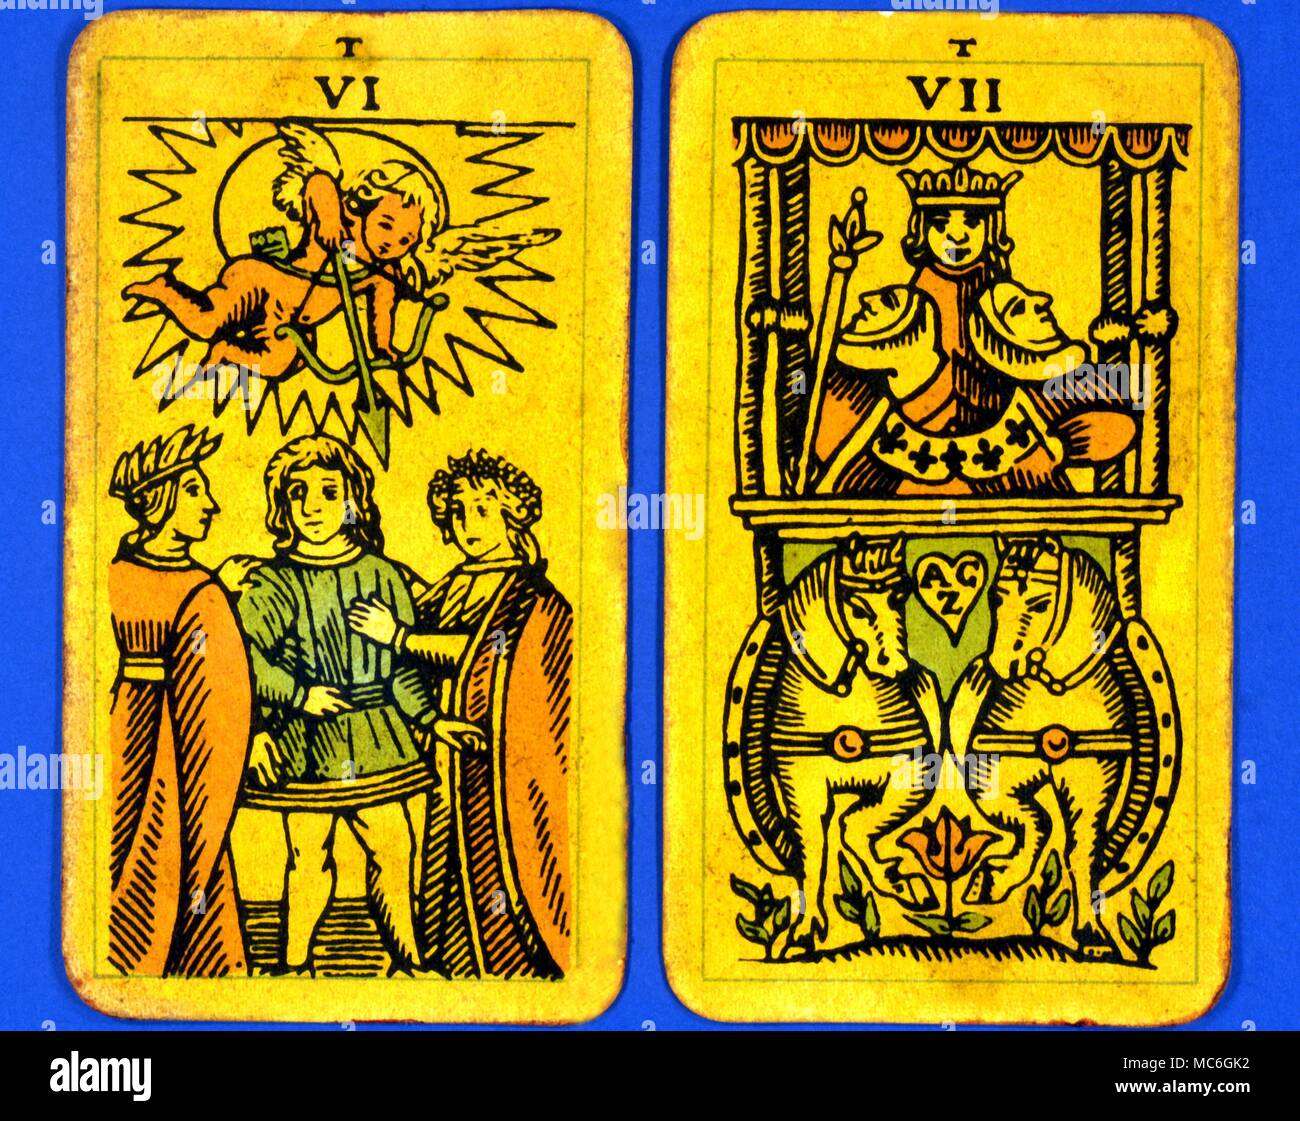 Tarot Cards-Majo Arcana- The Parisian Tarot. Card 6. The Lovers and Card 7.  The Chariot. Two cards from a Major Arcana picture Tarot, probably designed  in an archaizing style in loose imitation